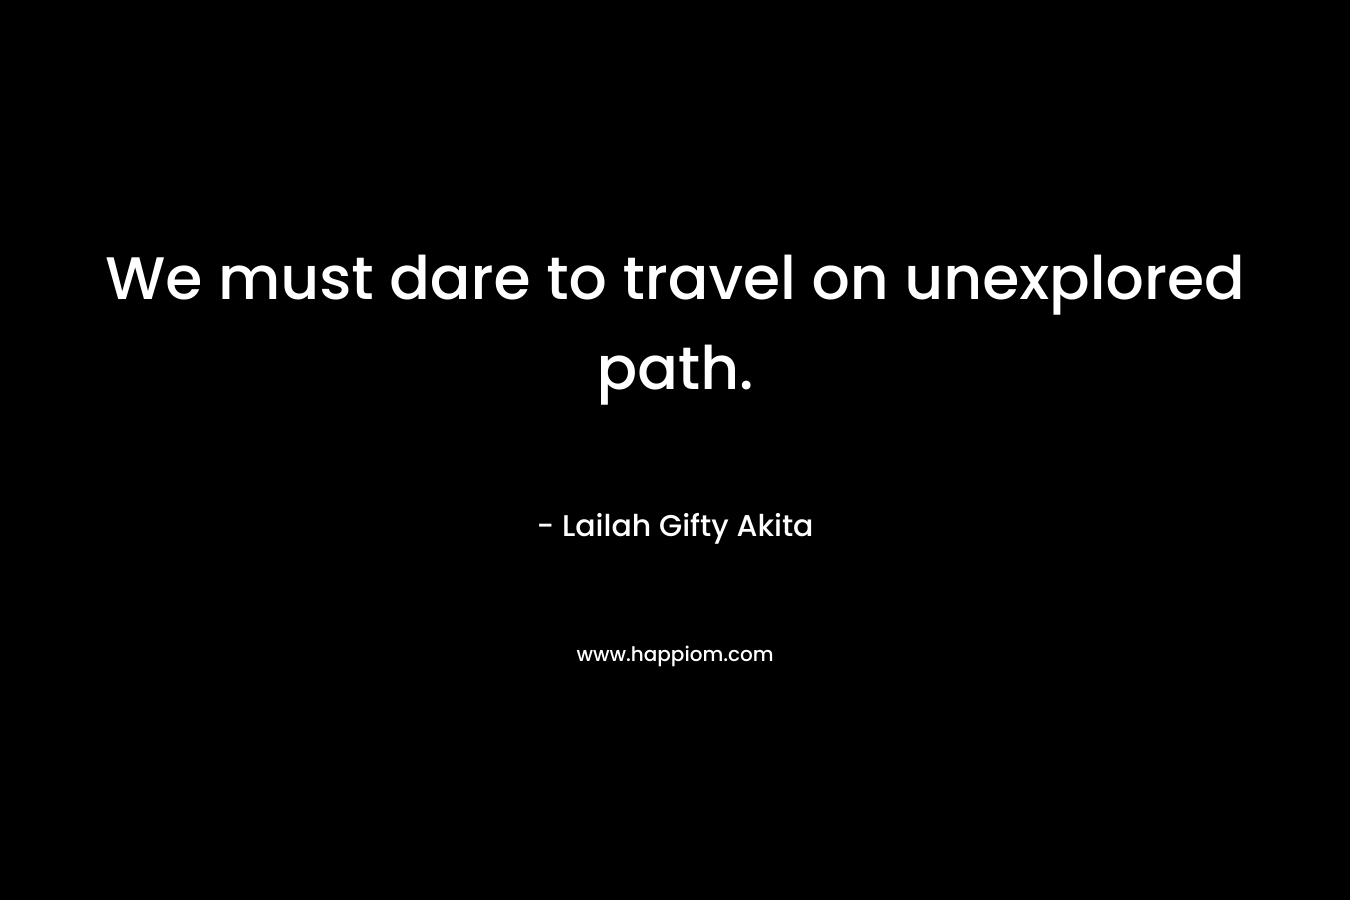 We must dare to travel on unexplored path. – Lailah Gifty Akita